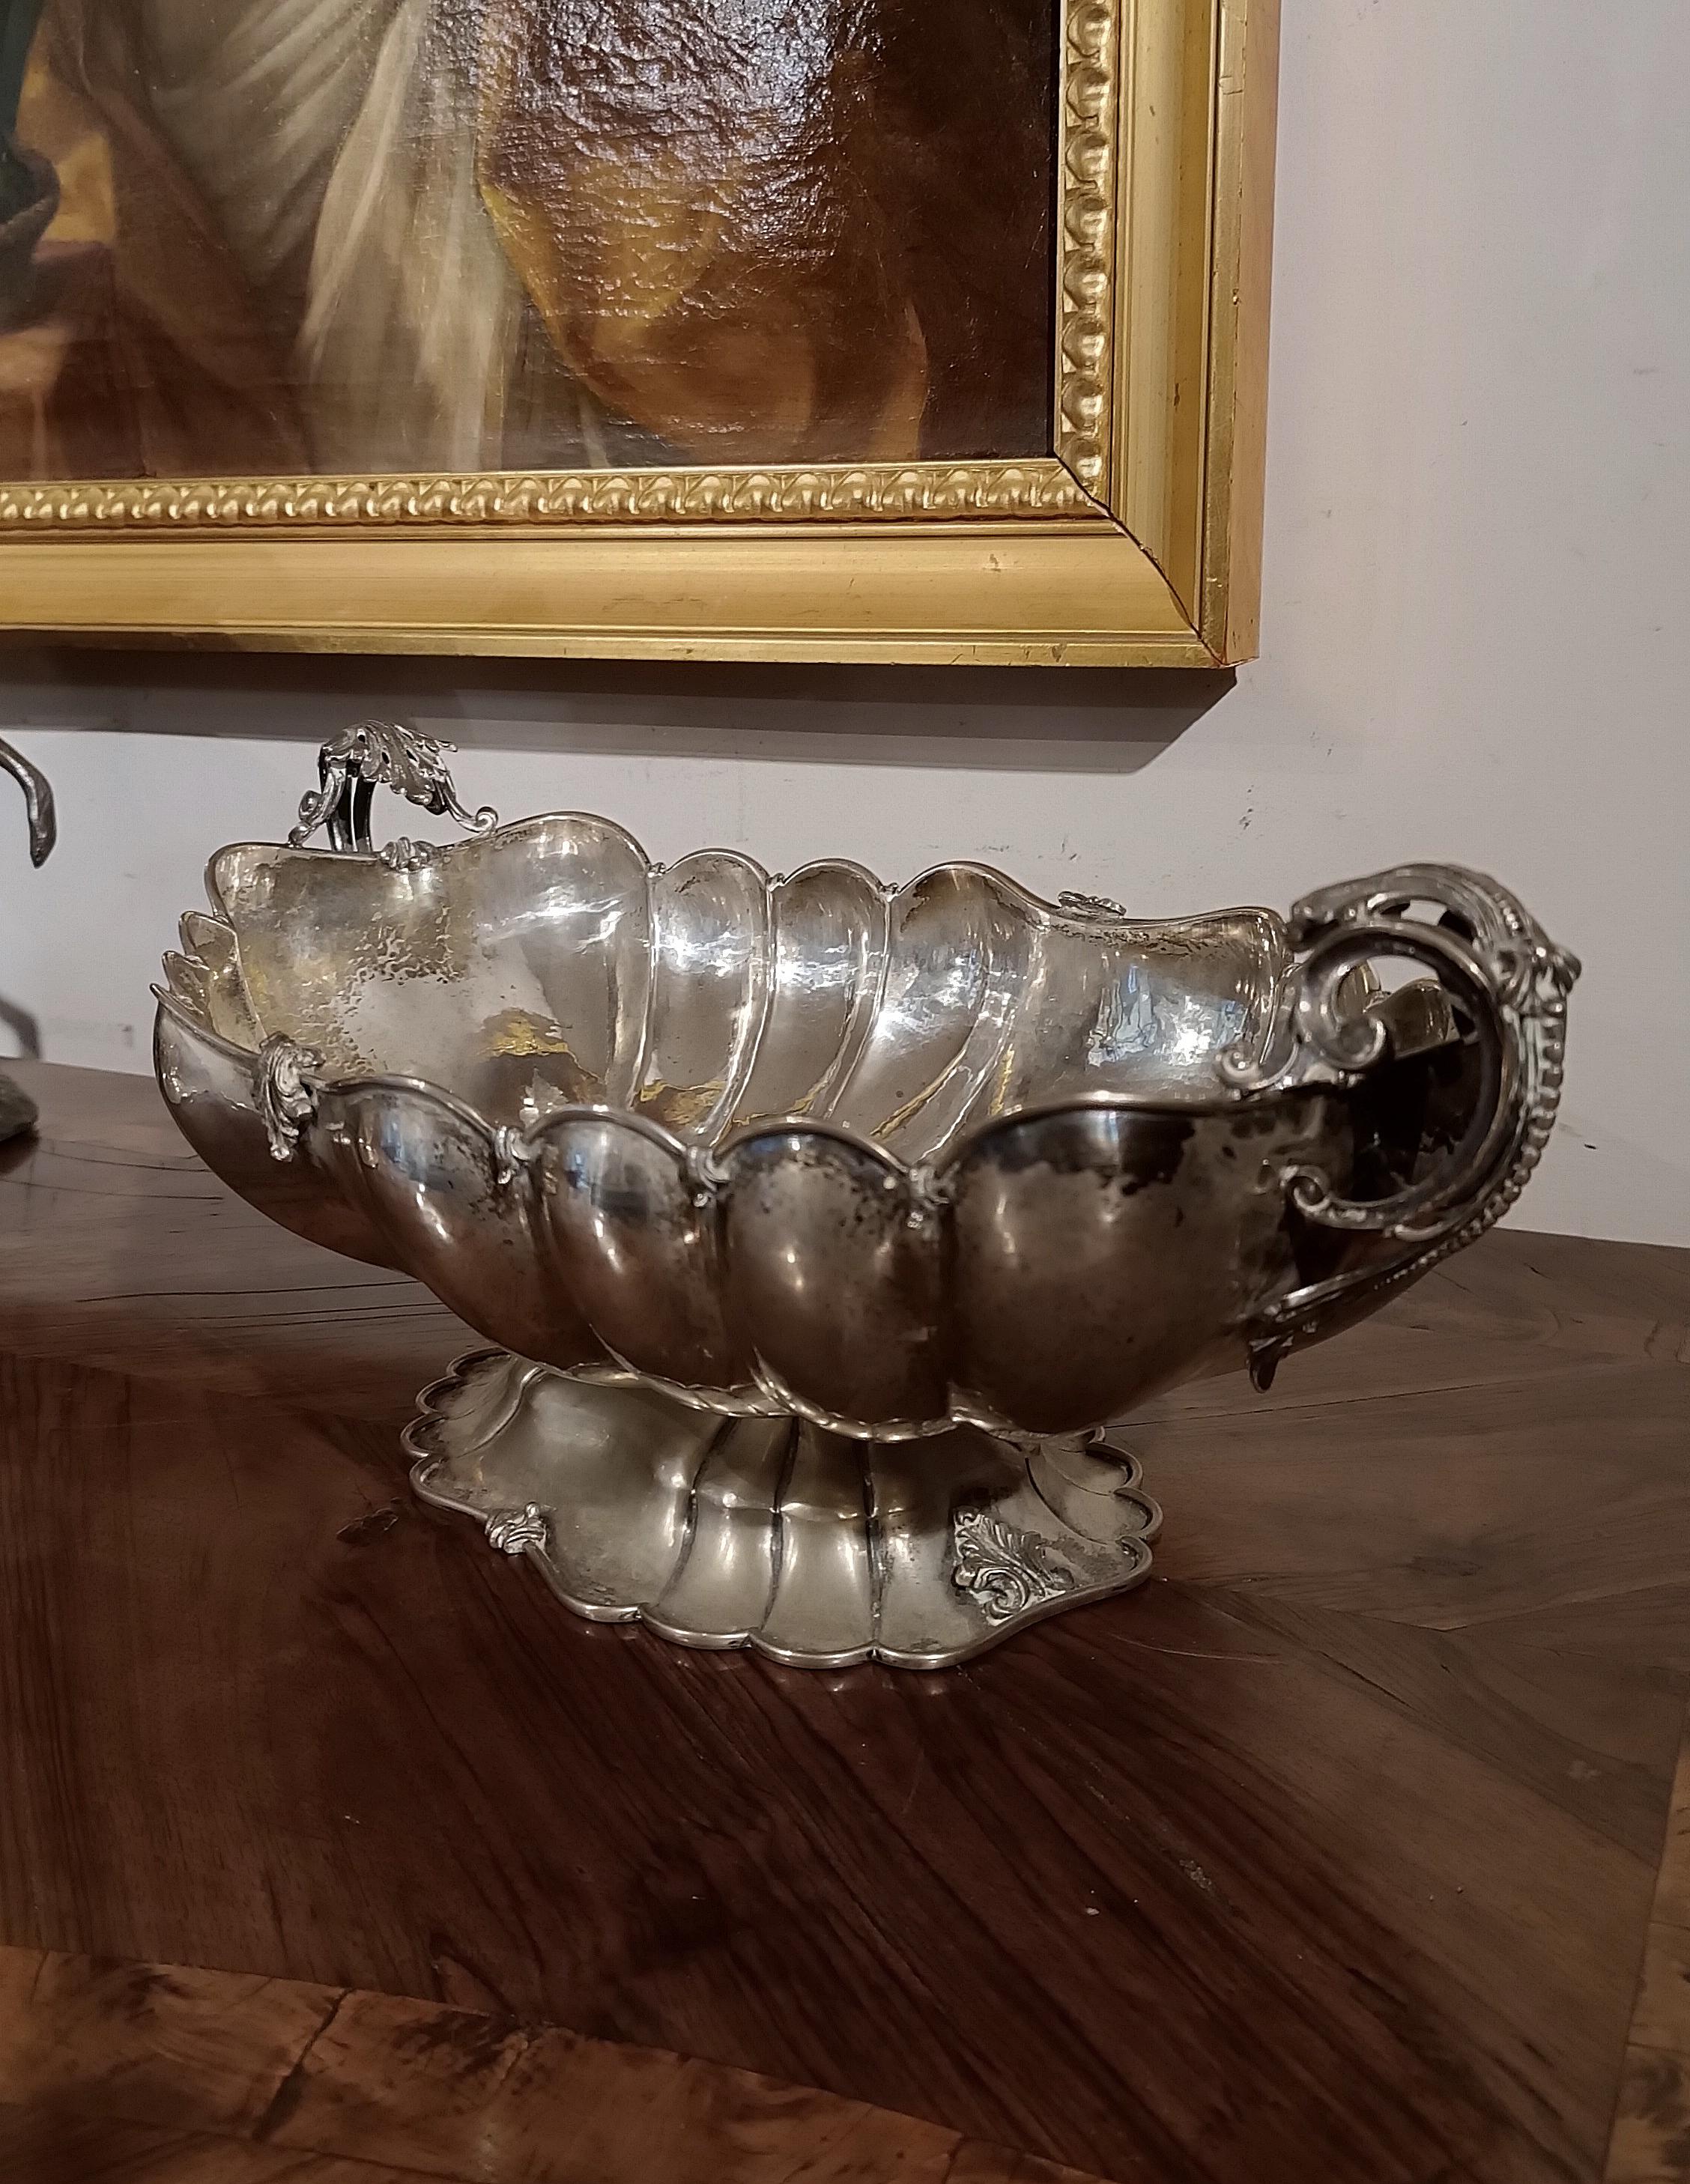 LATE 19th-EARLY 20th CENTURY ITALIAN SILVER CENTERPIECE For Sale 4